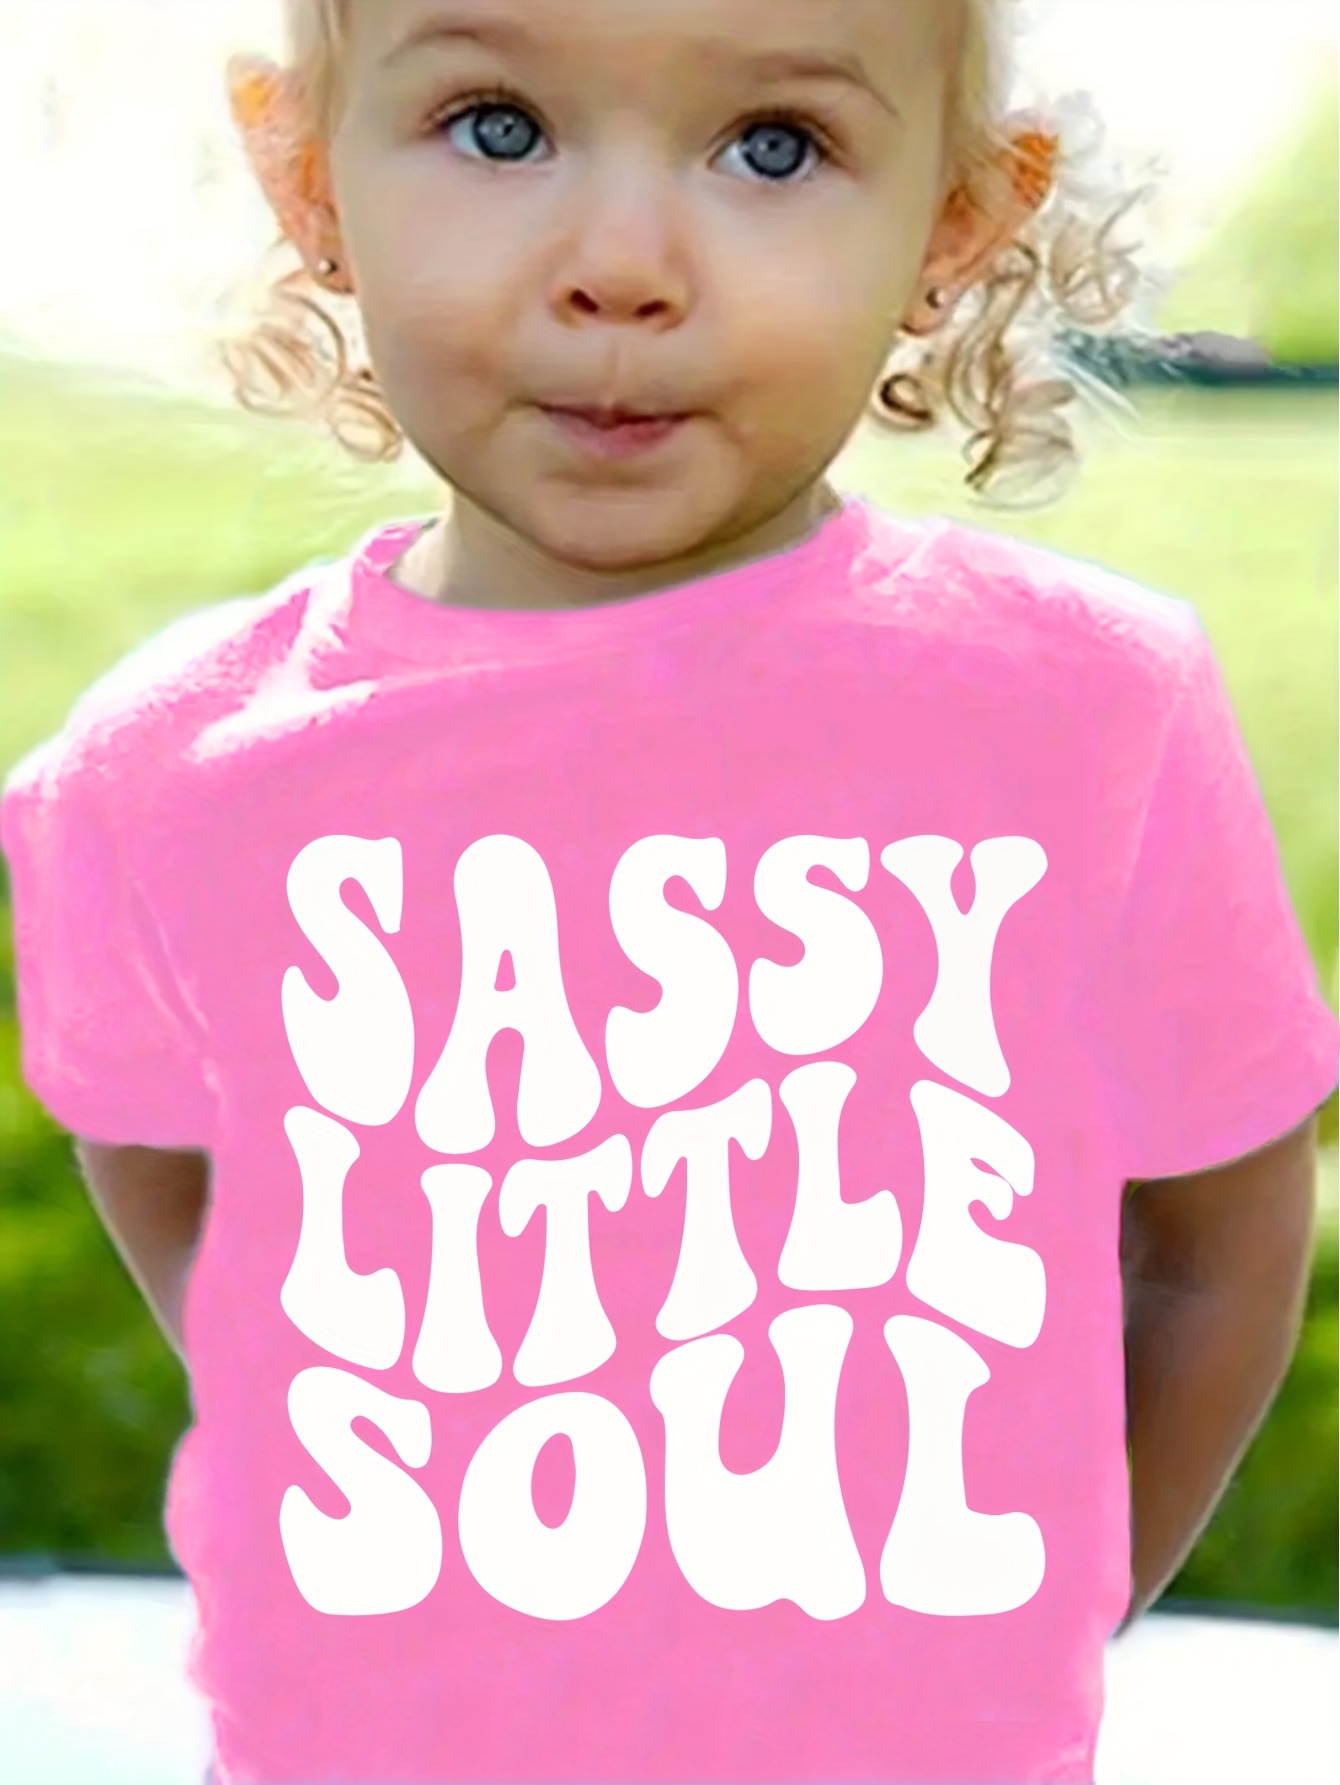 sassy little girl all pink clothes